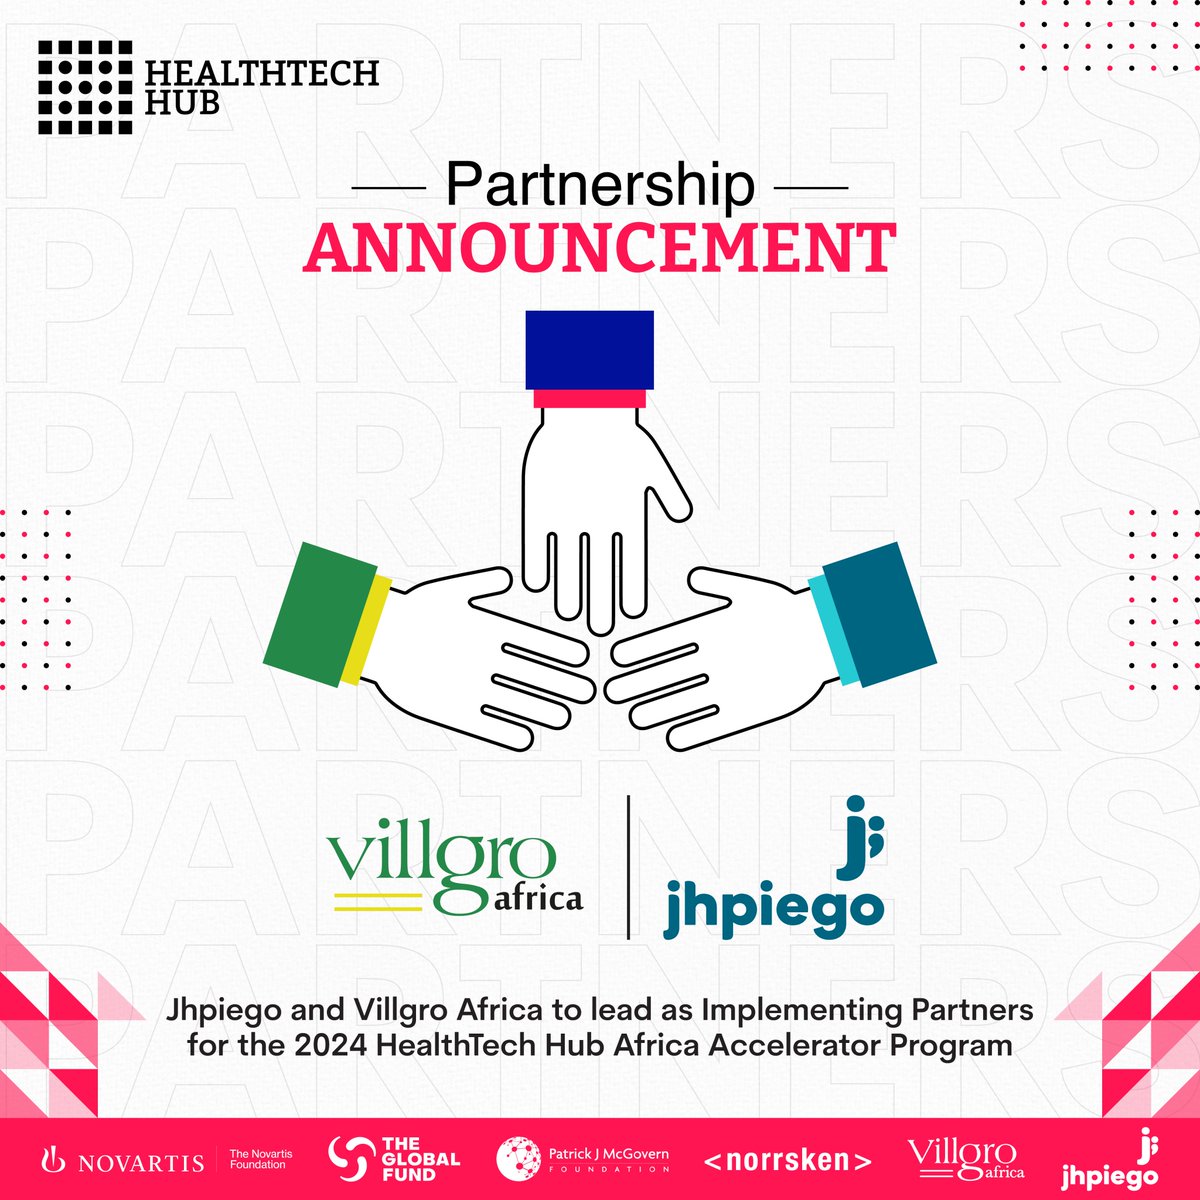 Exciting news! Jhpiego and Villgro Africa team up as lead partners for the 2024 HealthTech Hub Africa Accelerator Program. This collaboration aims to drive innovation, address health challenges, and scale technology in public health systems. #HealthTech #HTHA2024 #AfricanStartup